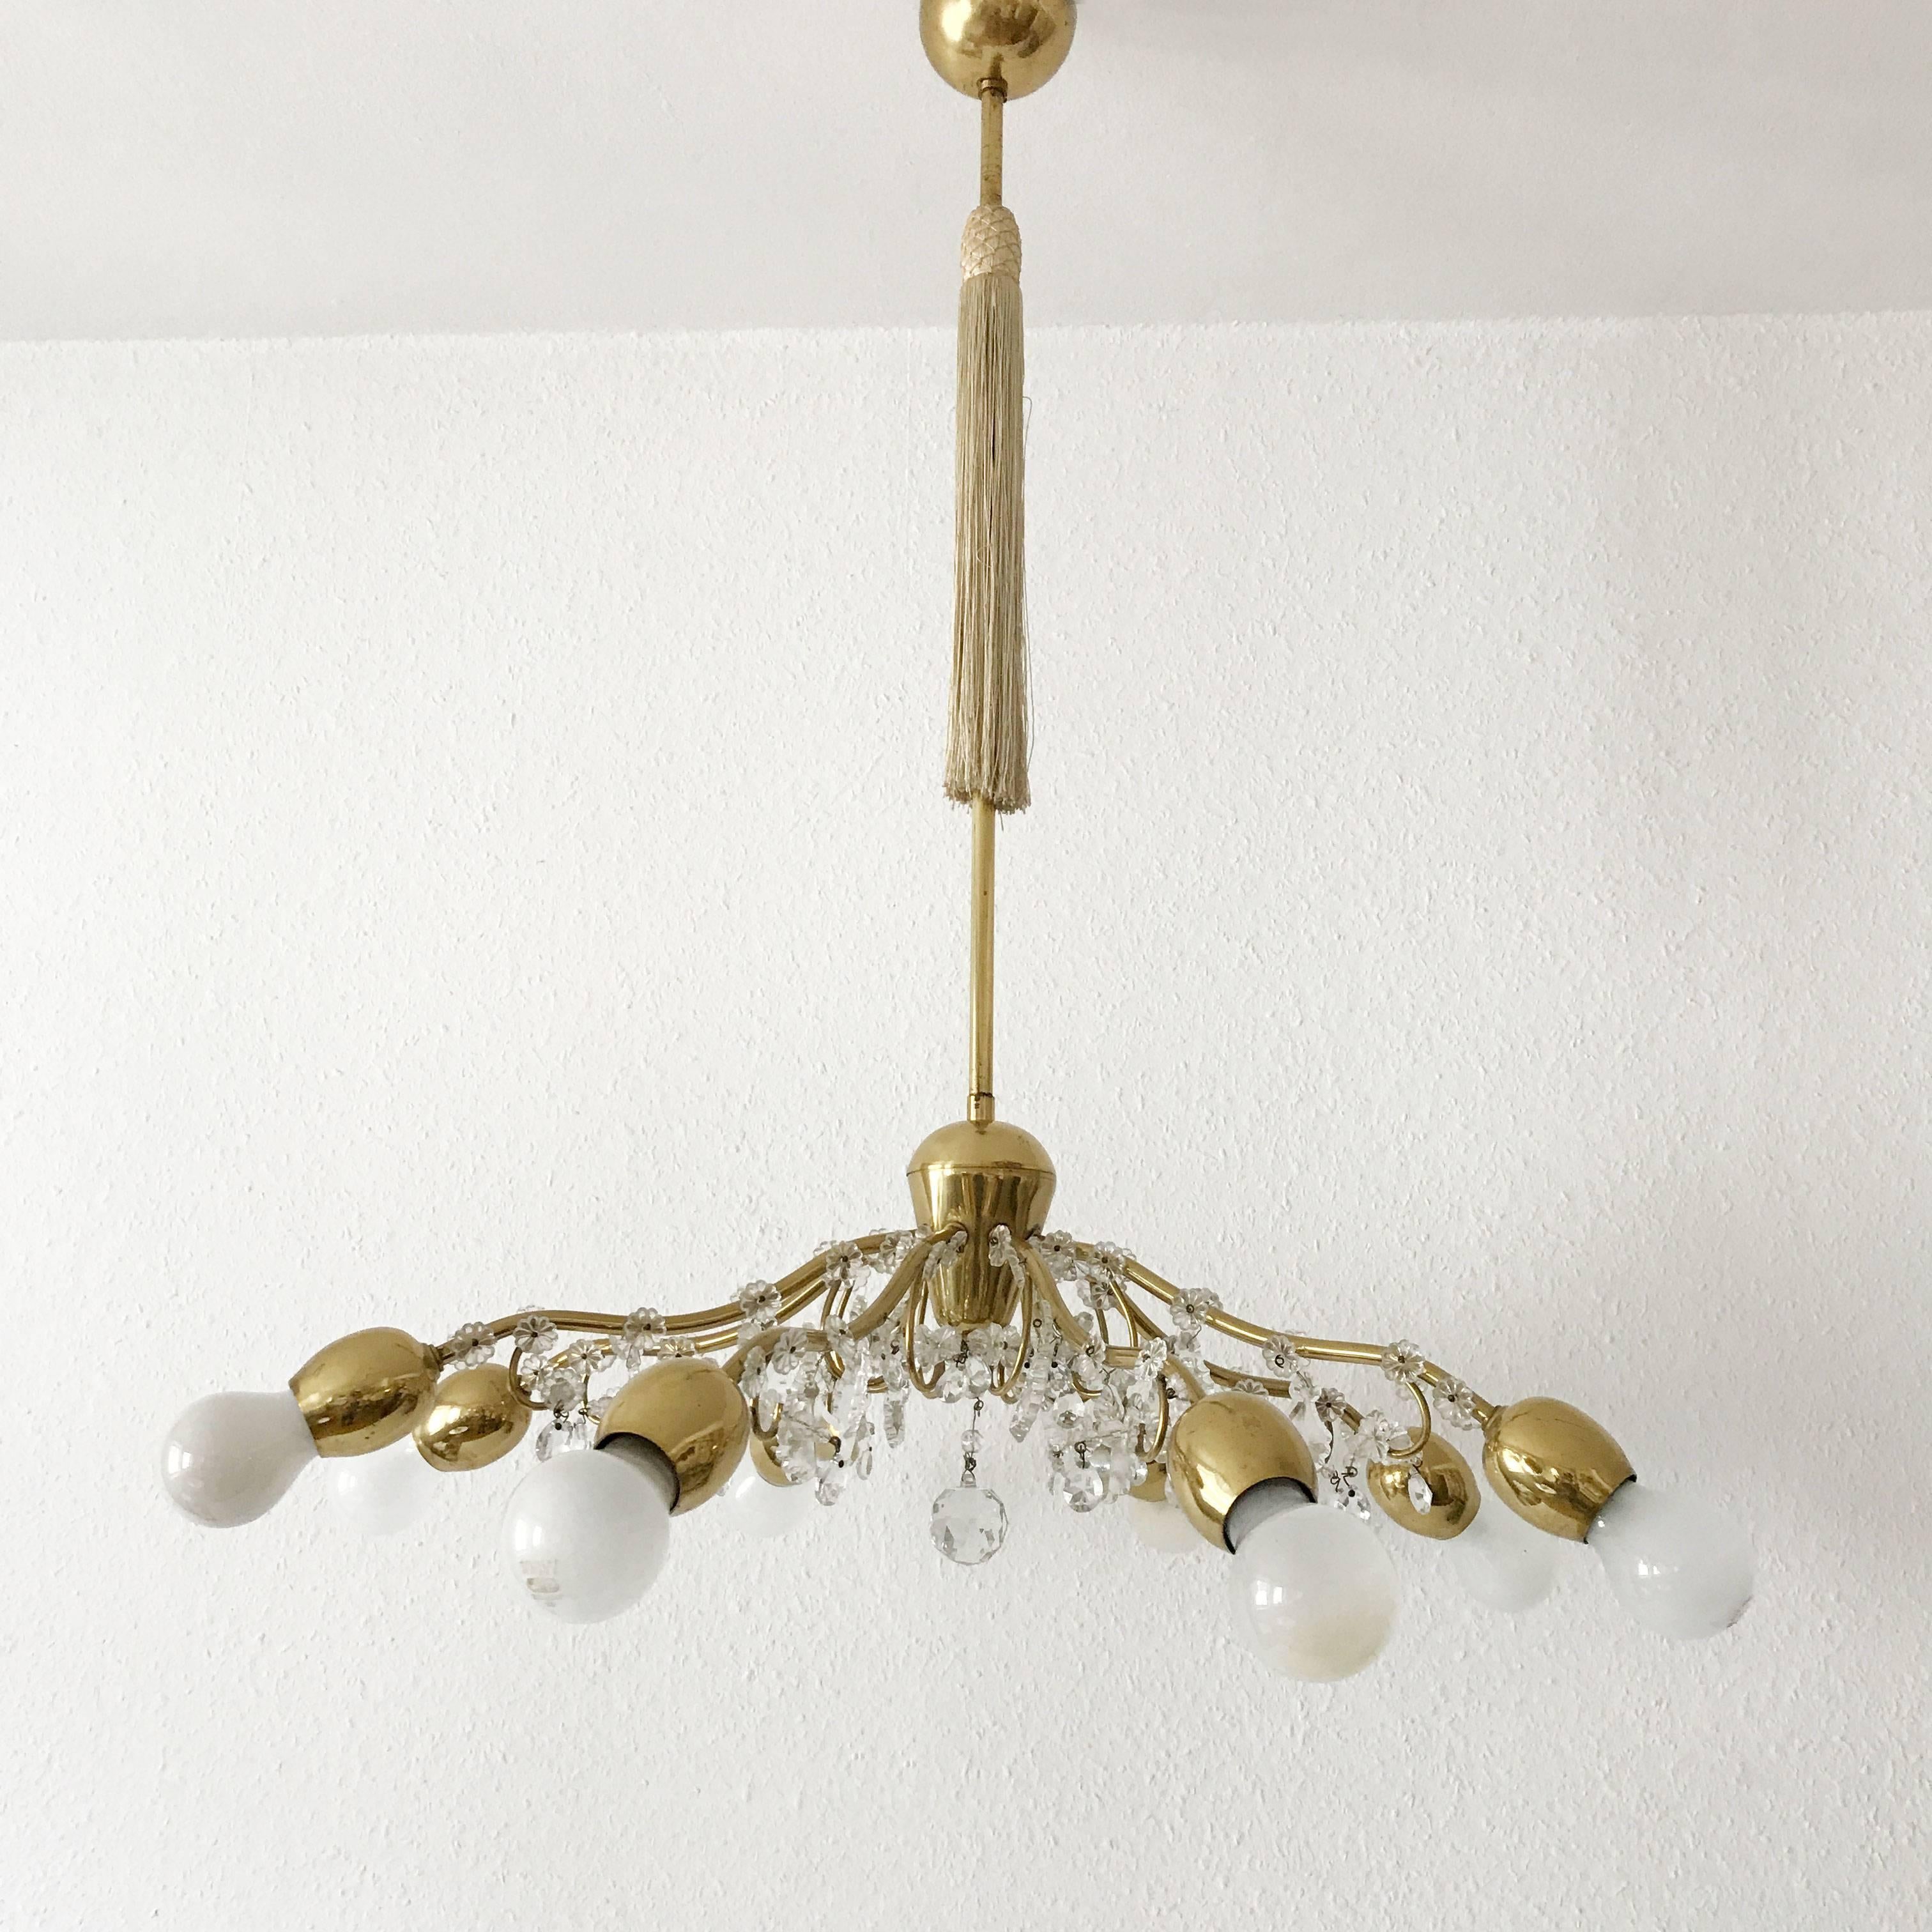 Mid-20th Century Eight-Armed Sputnik Chandelier or Pendant Lamp Bud by J.&L. Lobmeyr Vienna 1950s For Sale